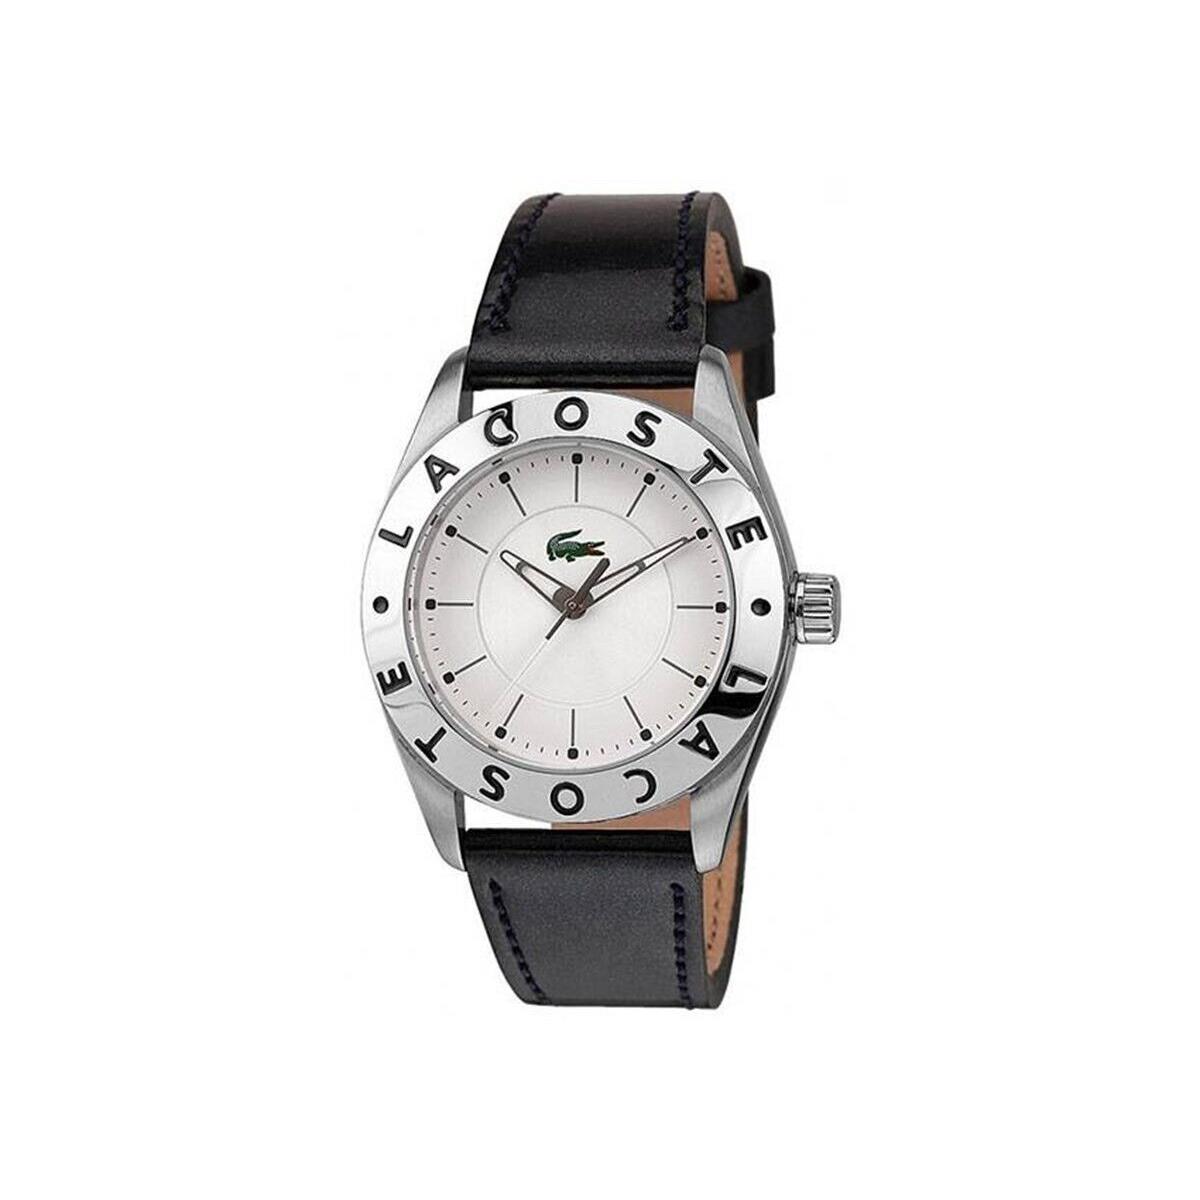 Lacoste Men`s Watch Black Leather Band 2000585